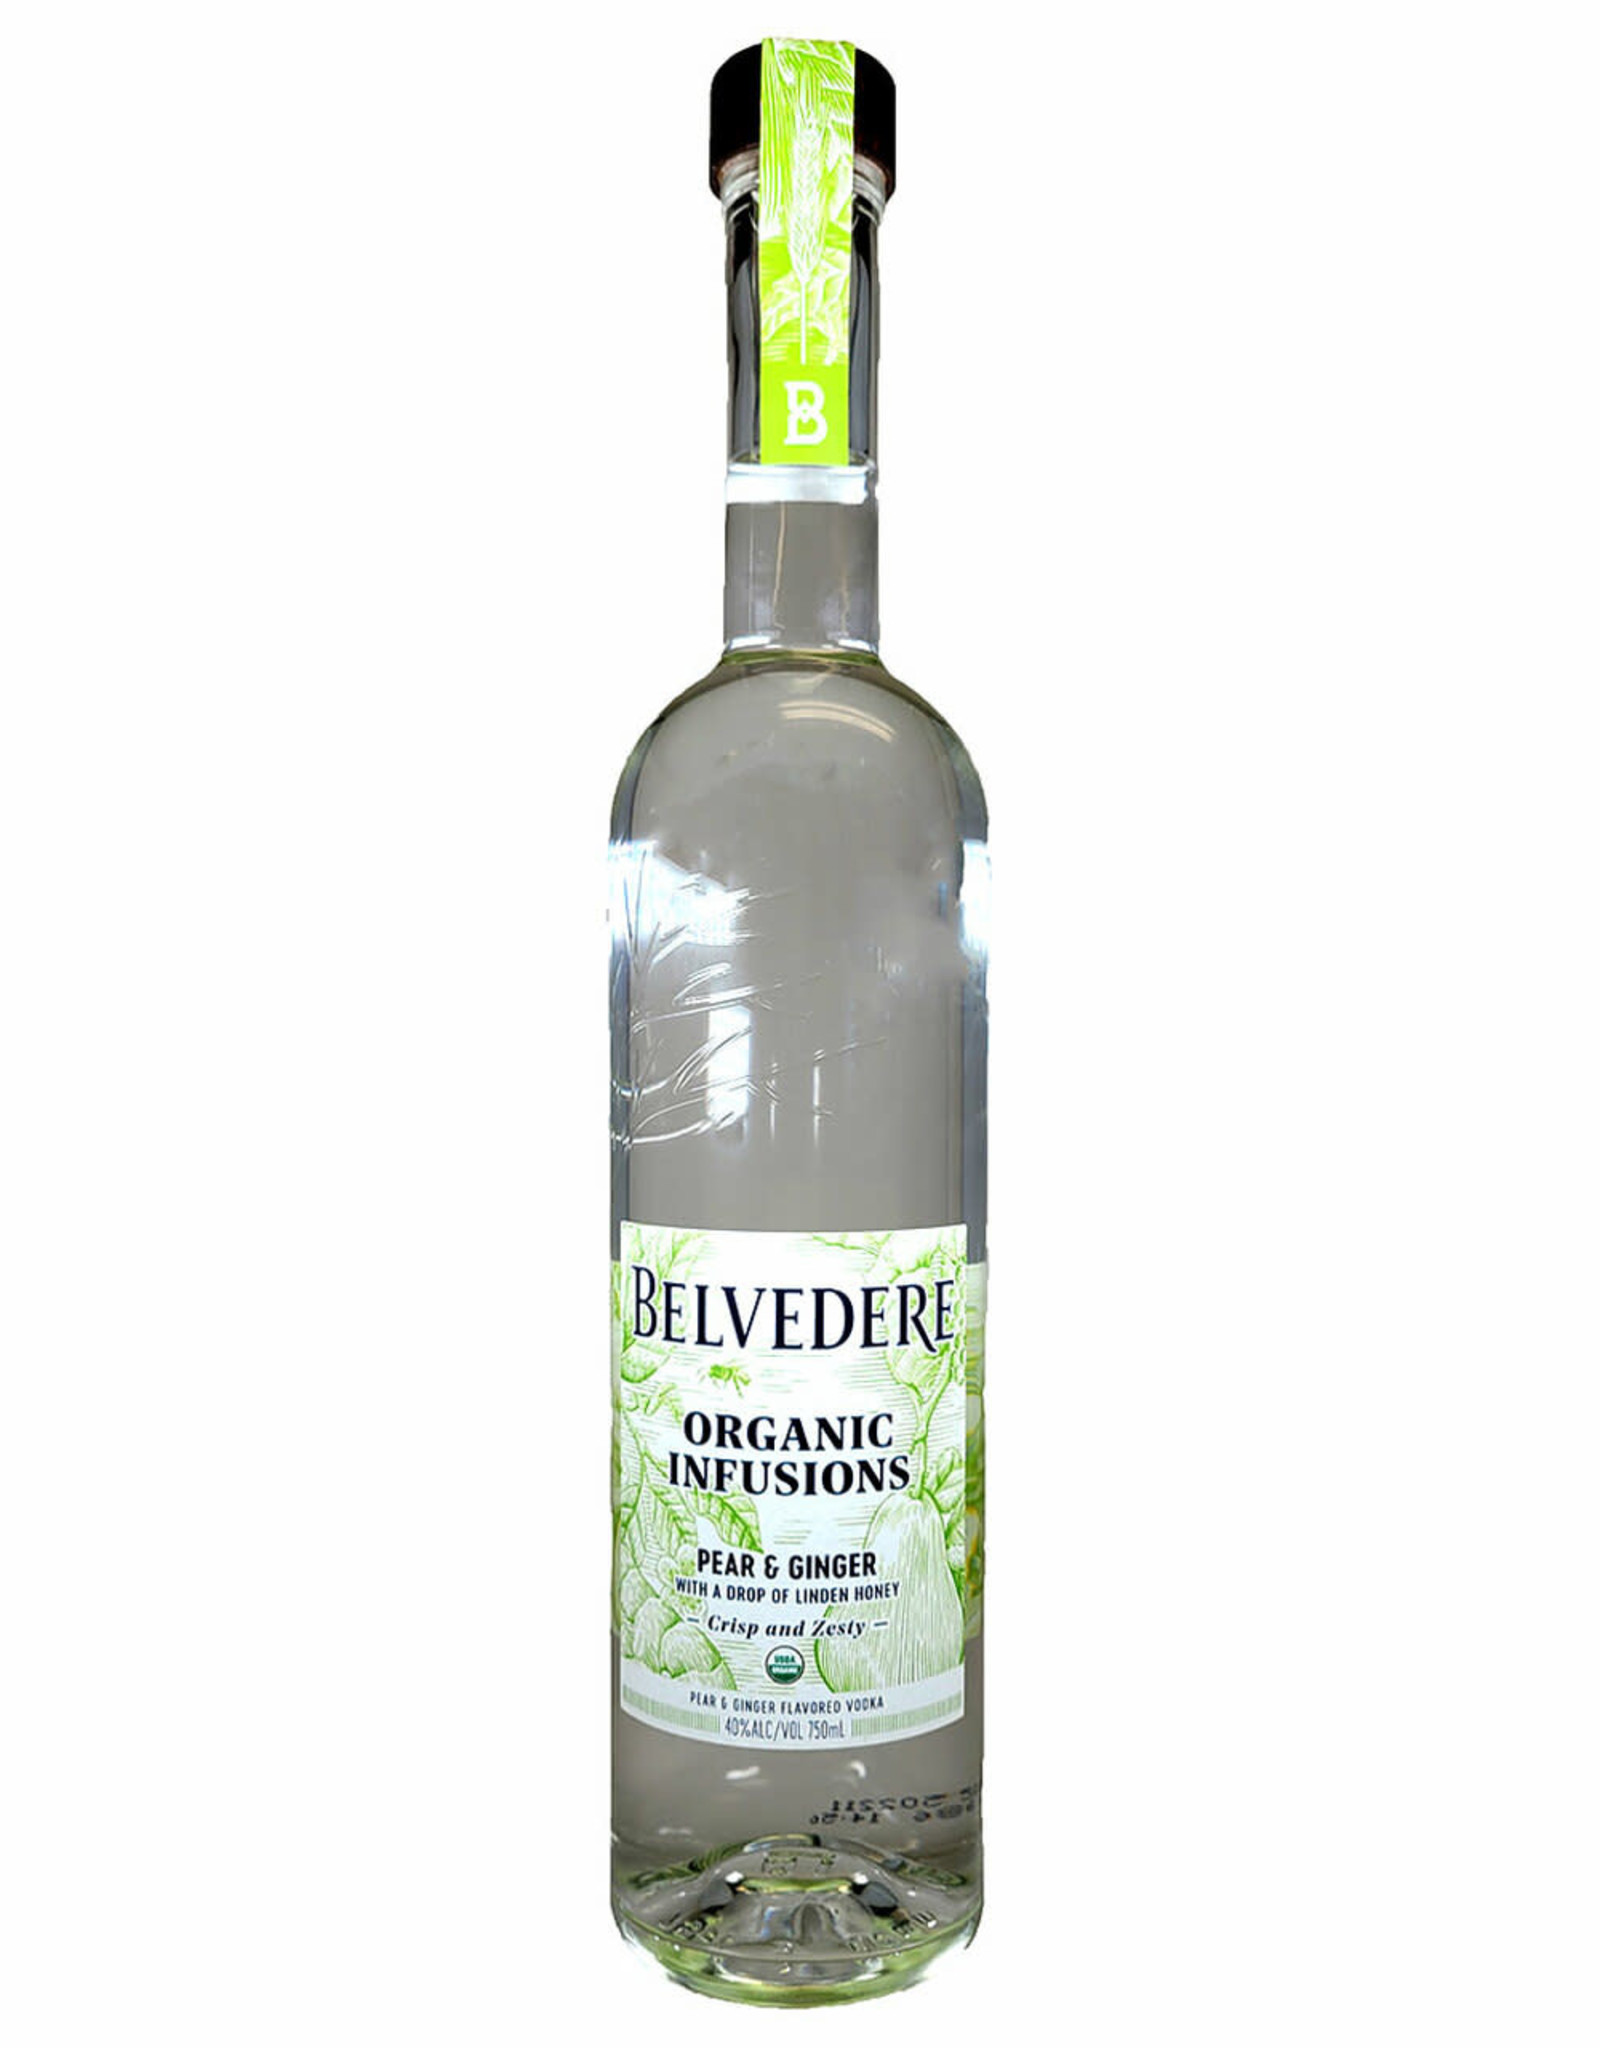 Belvedere Belvedere Organic Infusions Pear & Ginger 750 mL